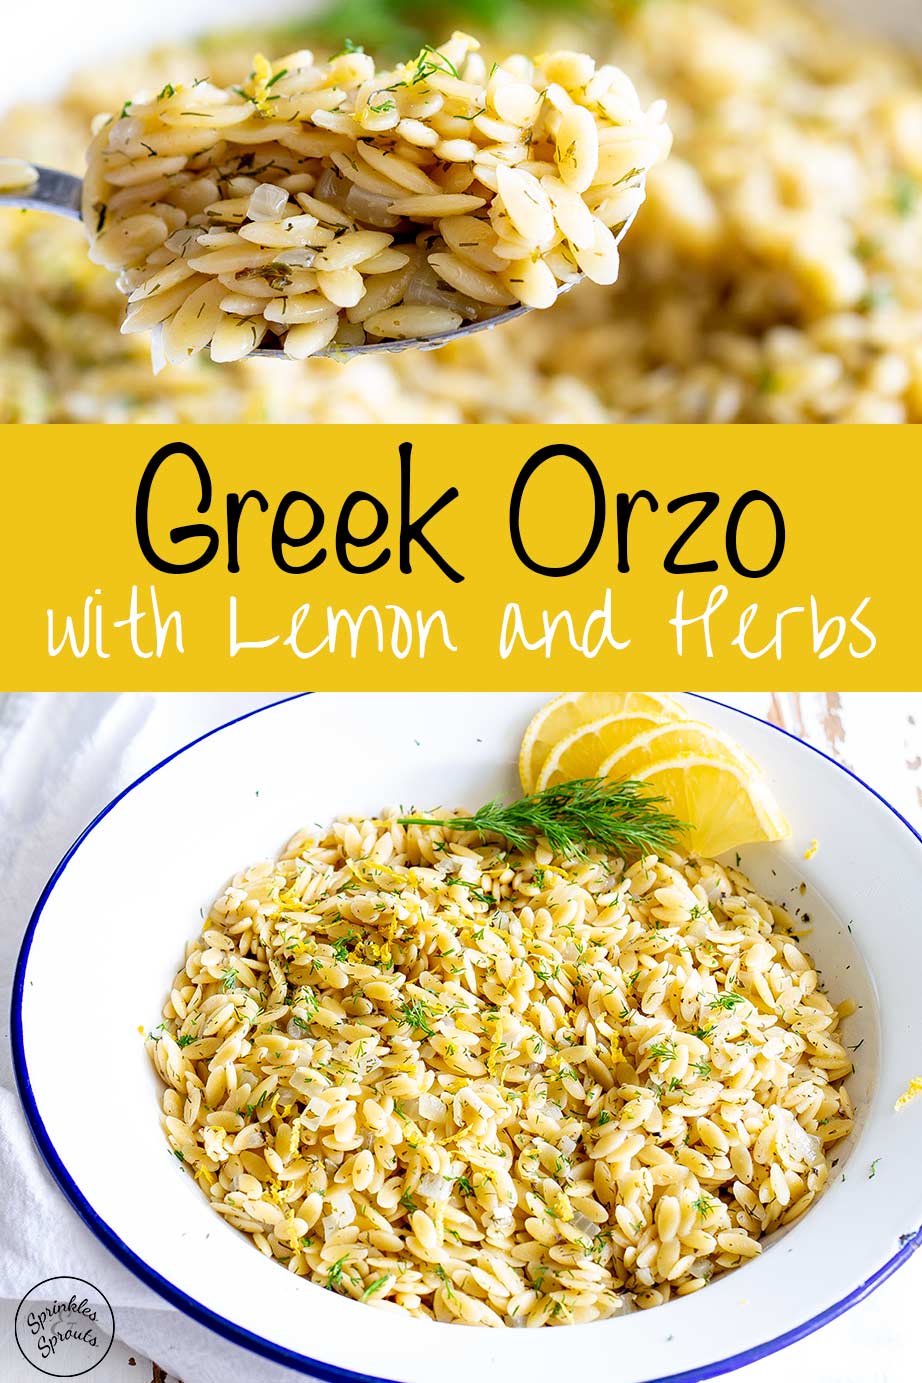 Two pictures of orzo with text in the middle